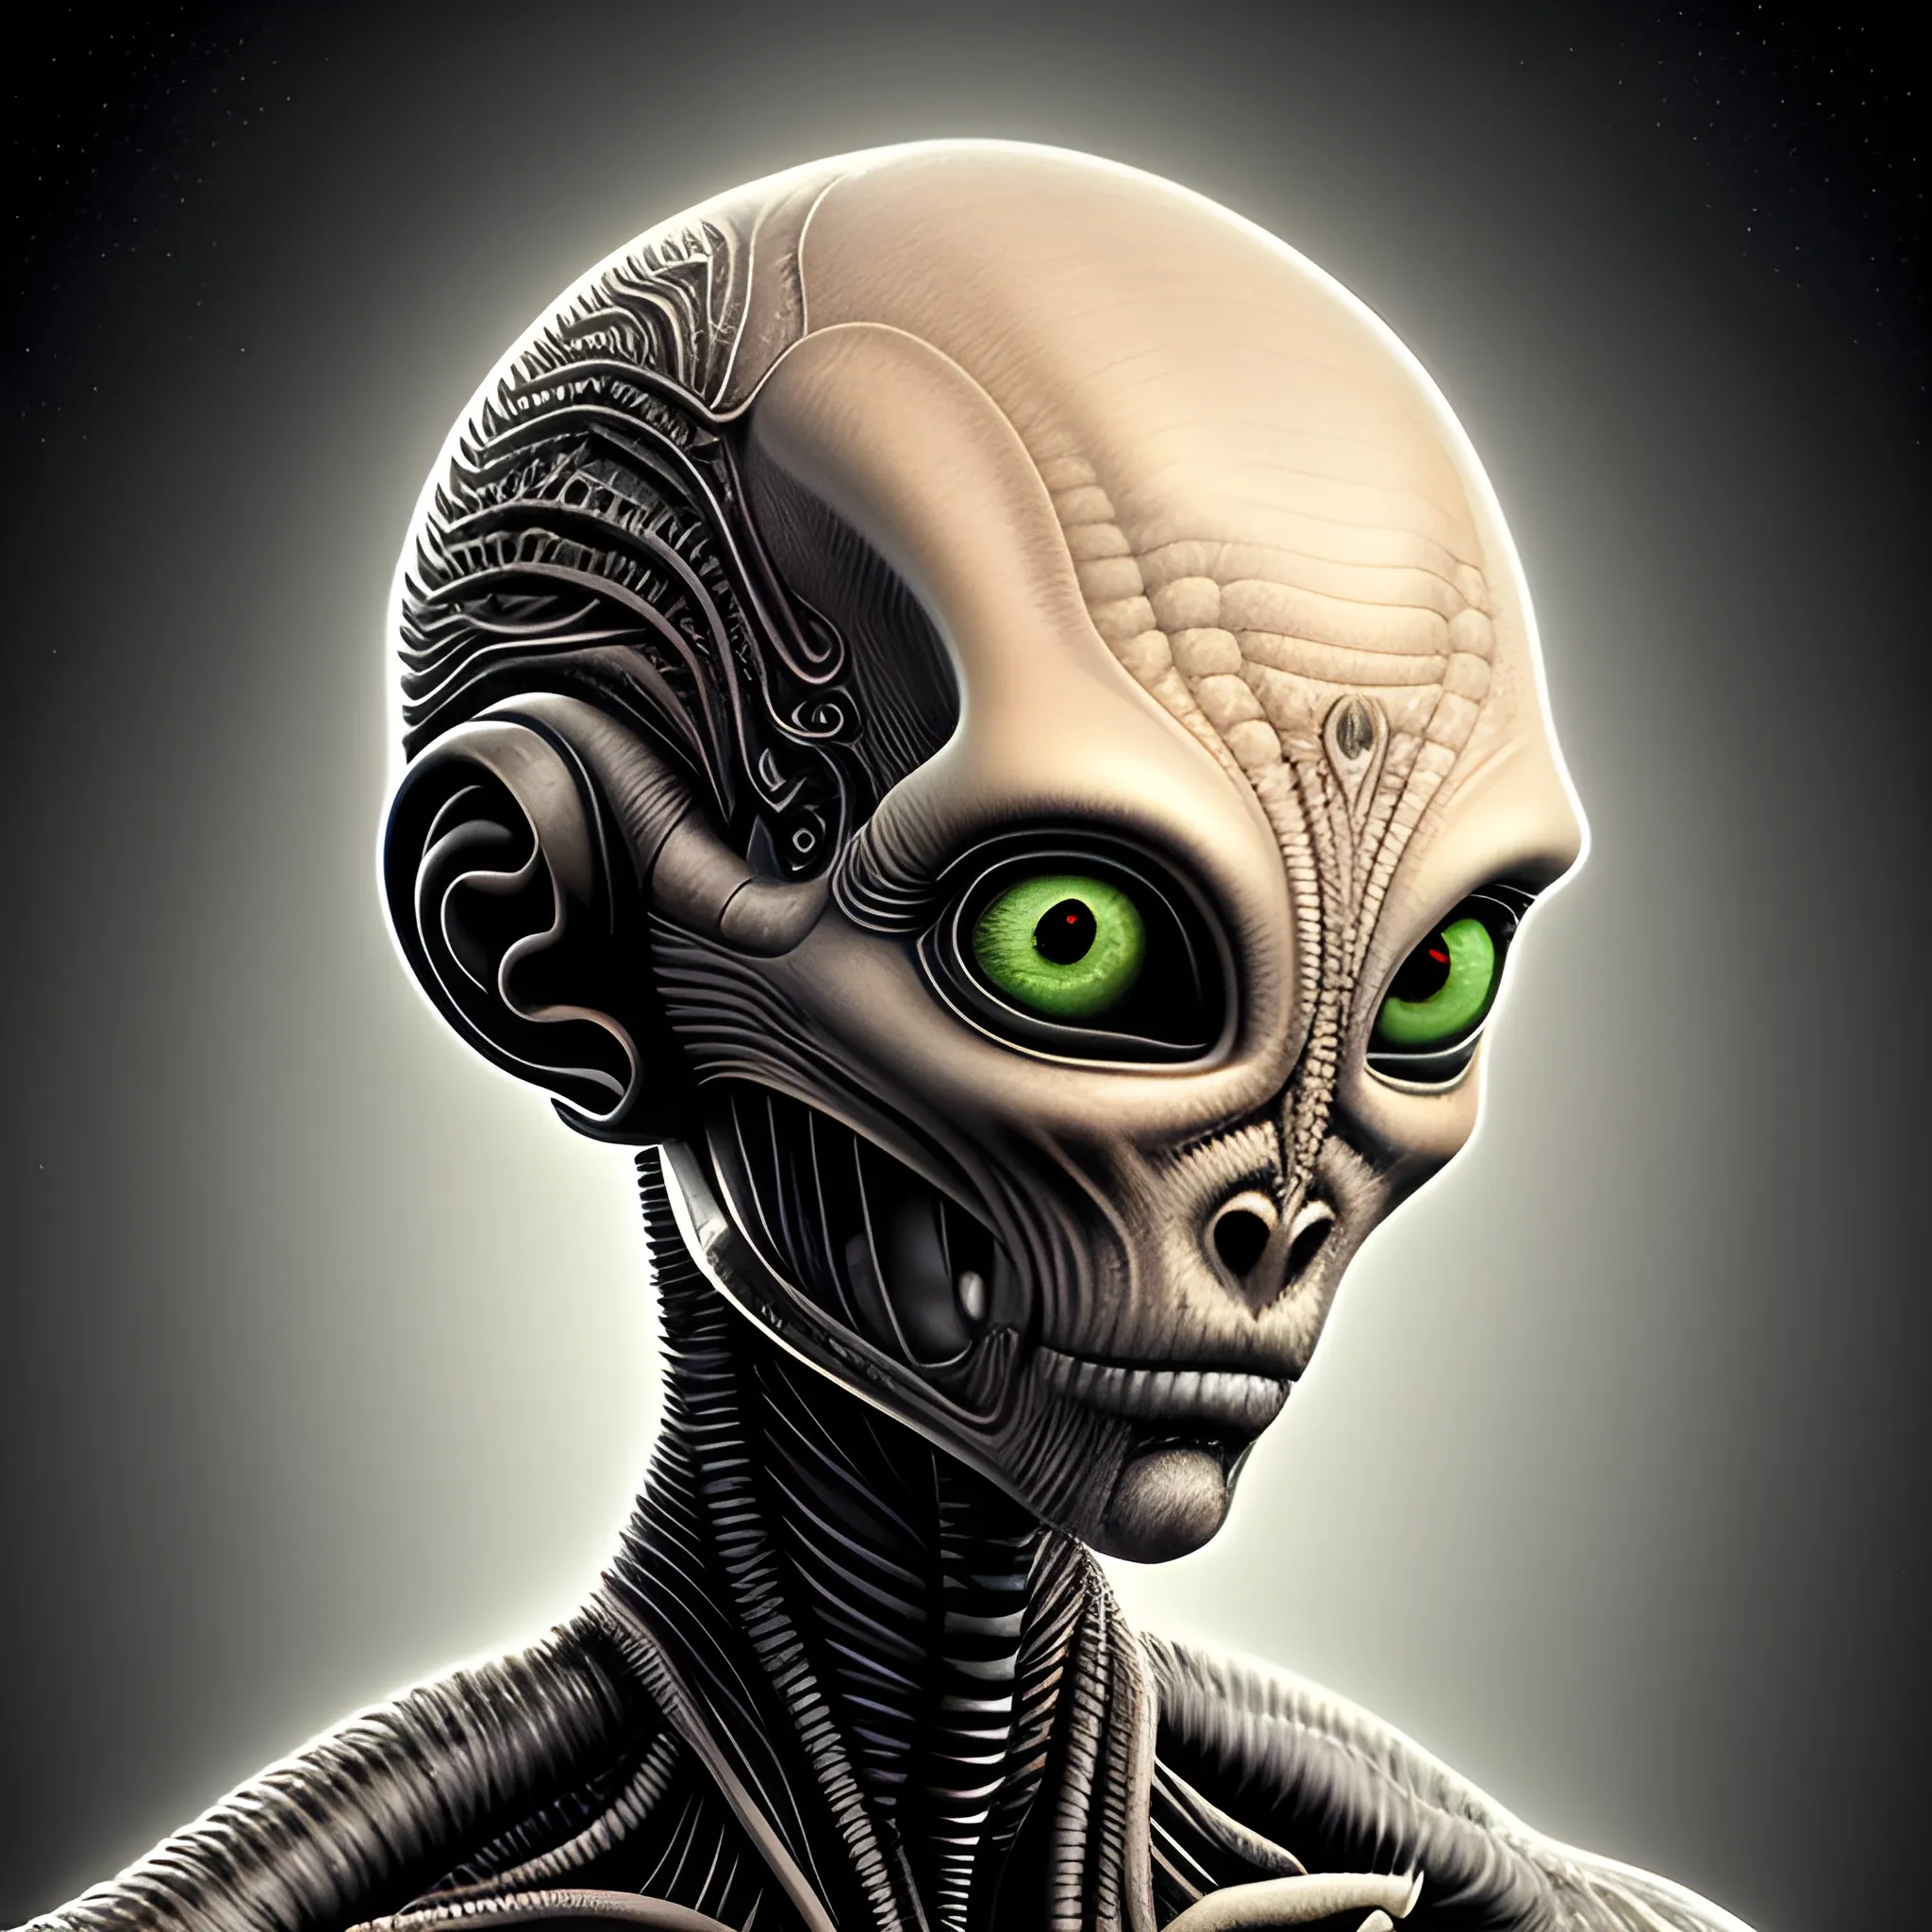 A detailed and intricate digital art piece in a cinematic style, this ultra high resolution portrait of an alien lifeform is a true masterpiece